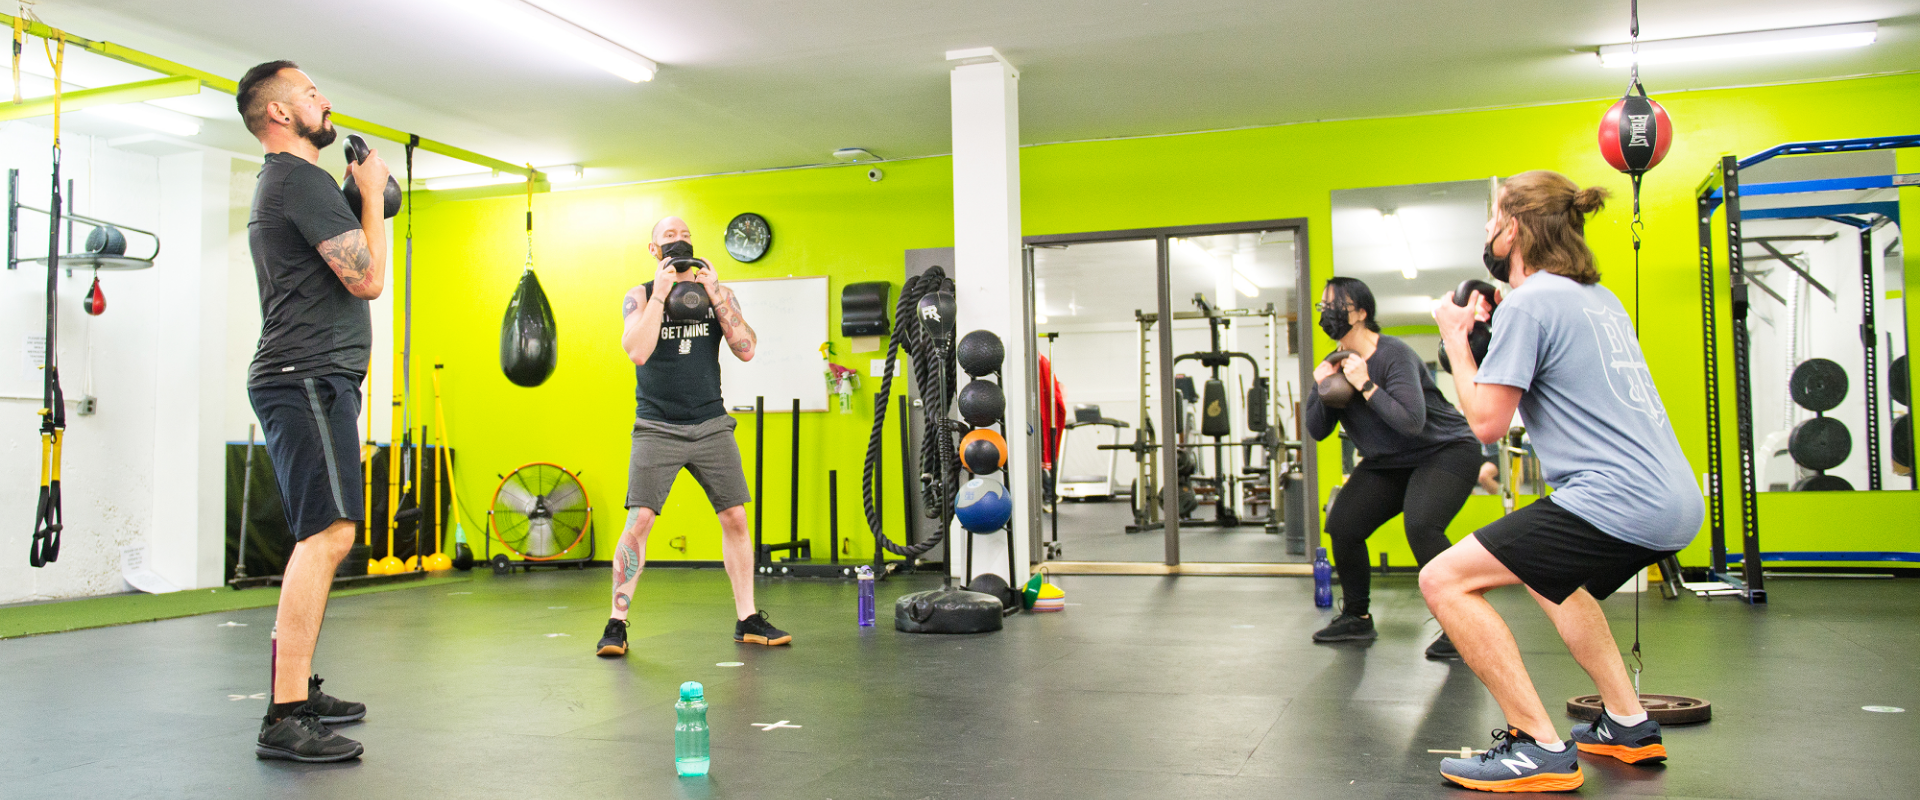 South Sherbrook Fitness Gym